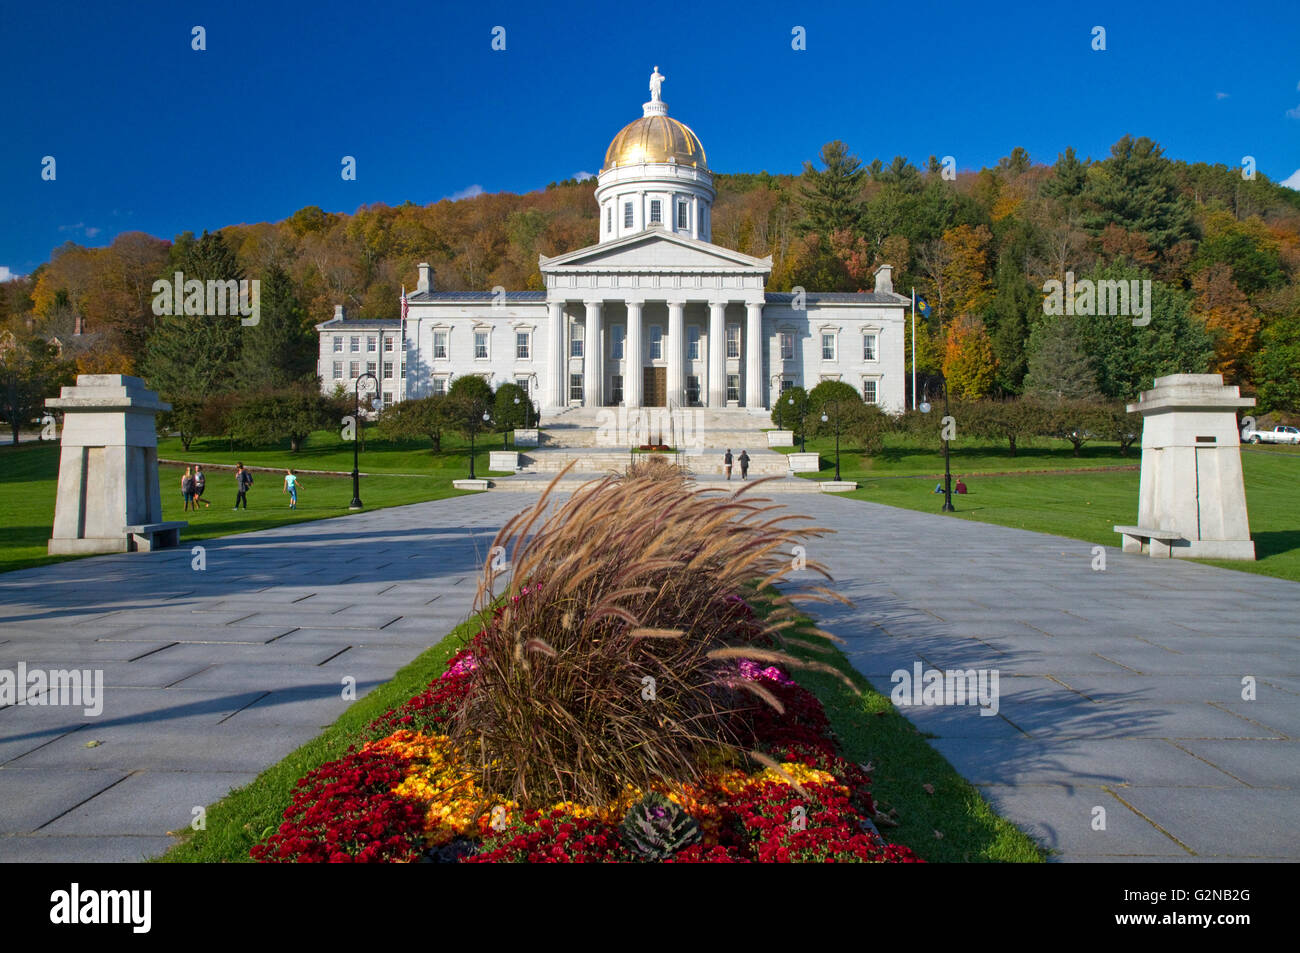 Vermont State House located in Montpelier, Vermont, USA. Stock Photo